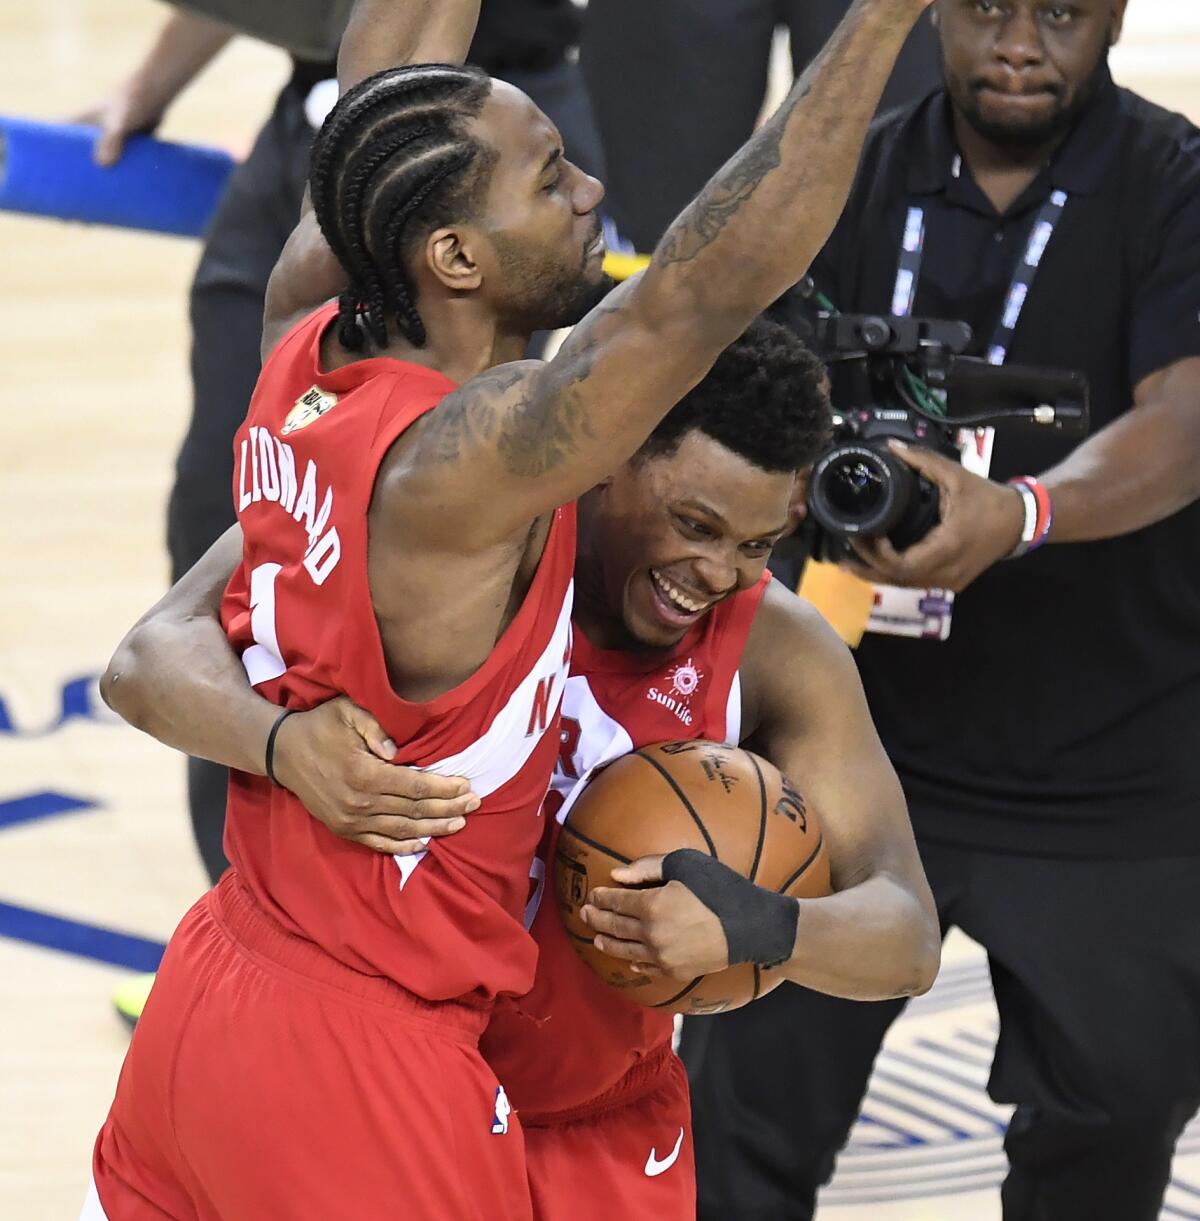 Toronto forward Kawhi Leonard, left, and guard Kyle Lowry celebrate after the final buzzer in the Raptors' championship-clinching win the Golden State Warriors in Game 6 of the NBA Finals at Oracle Arena in Oakland.